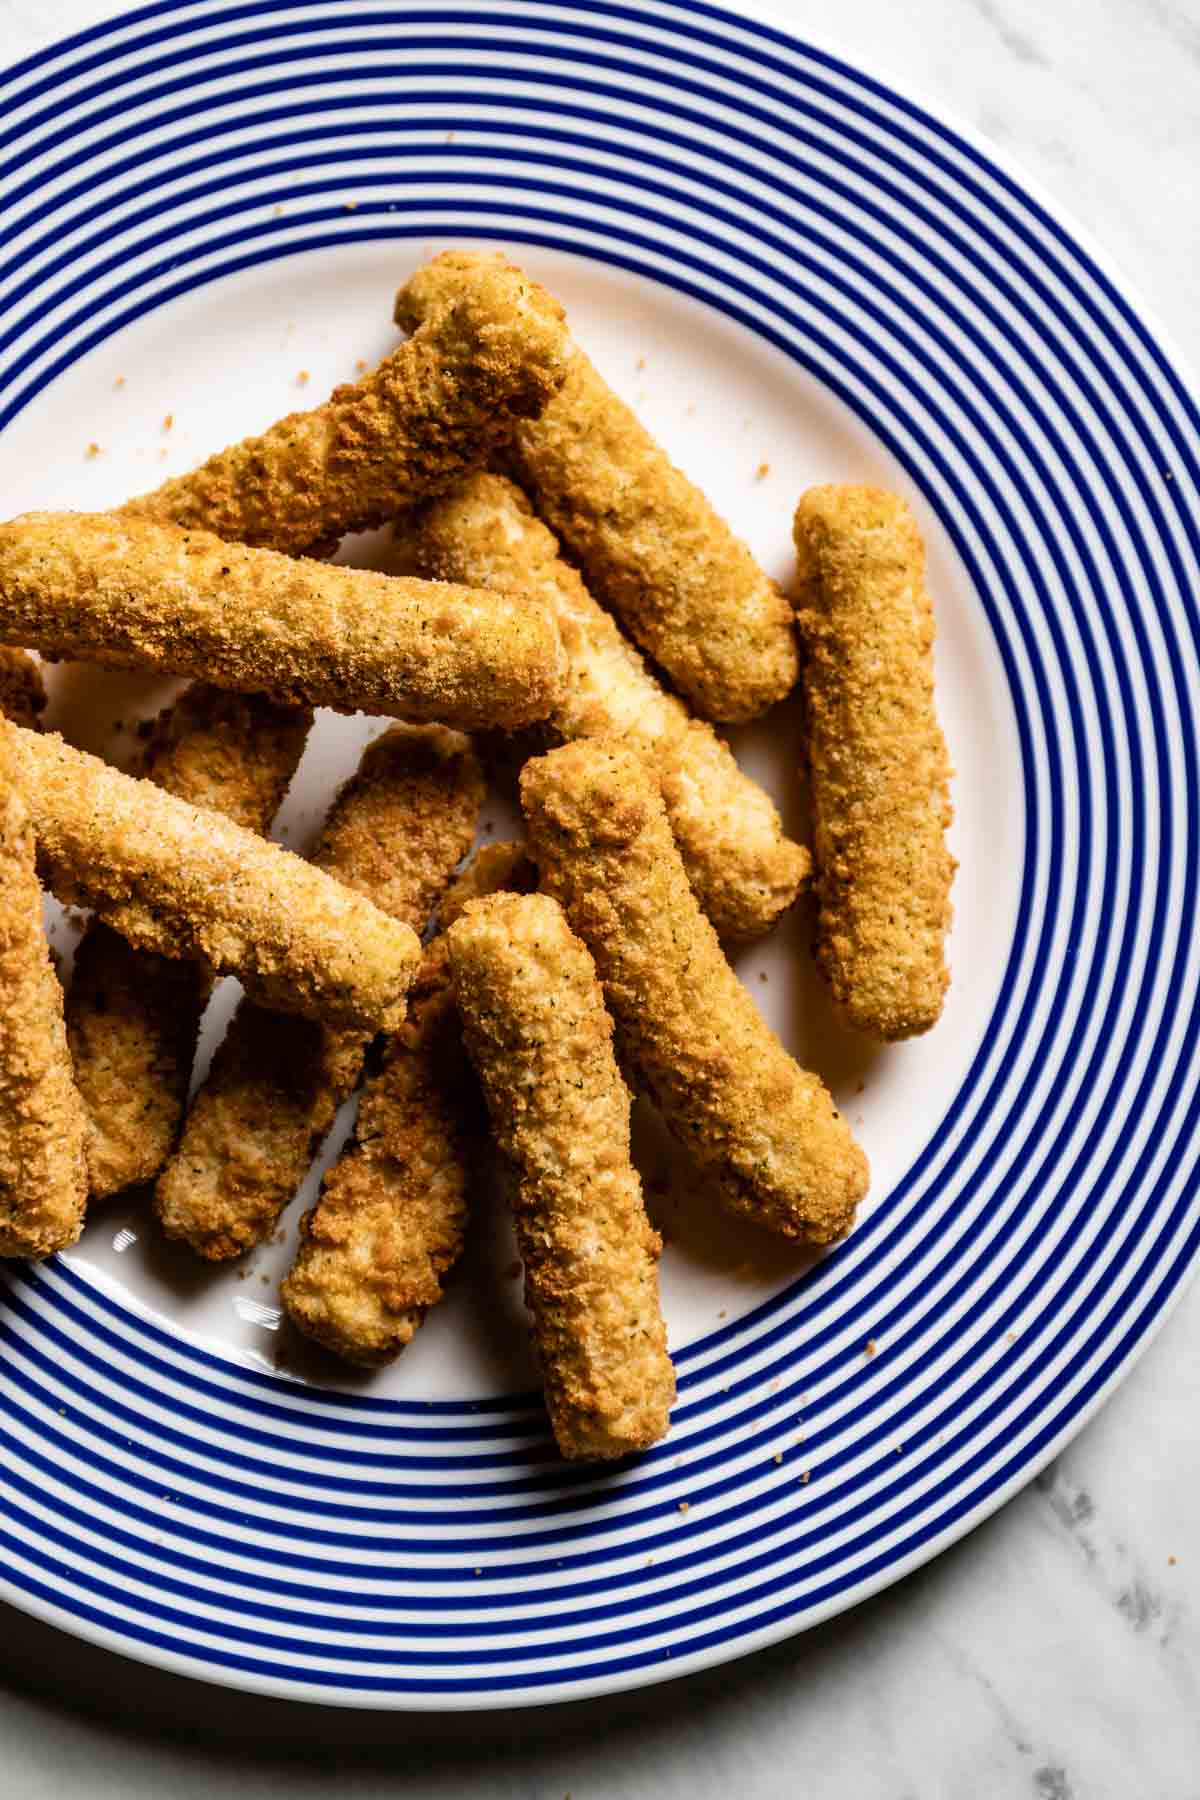 Frozen breaded cheese sticks on a plate from the top view.